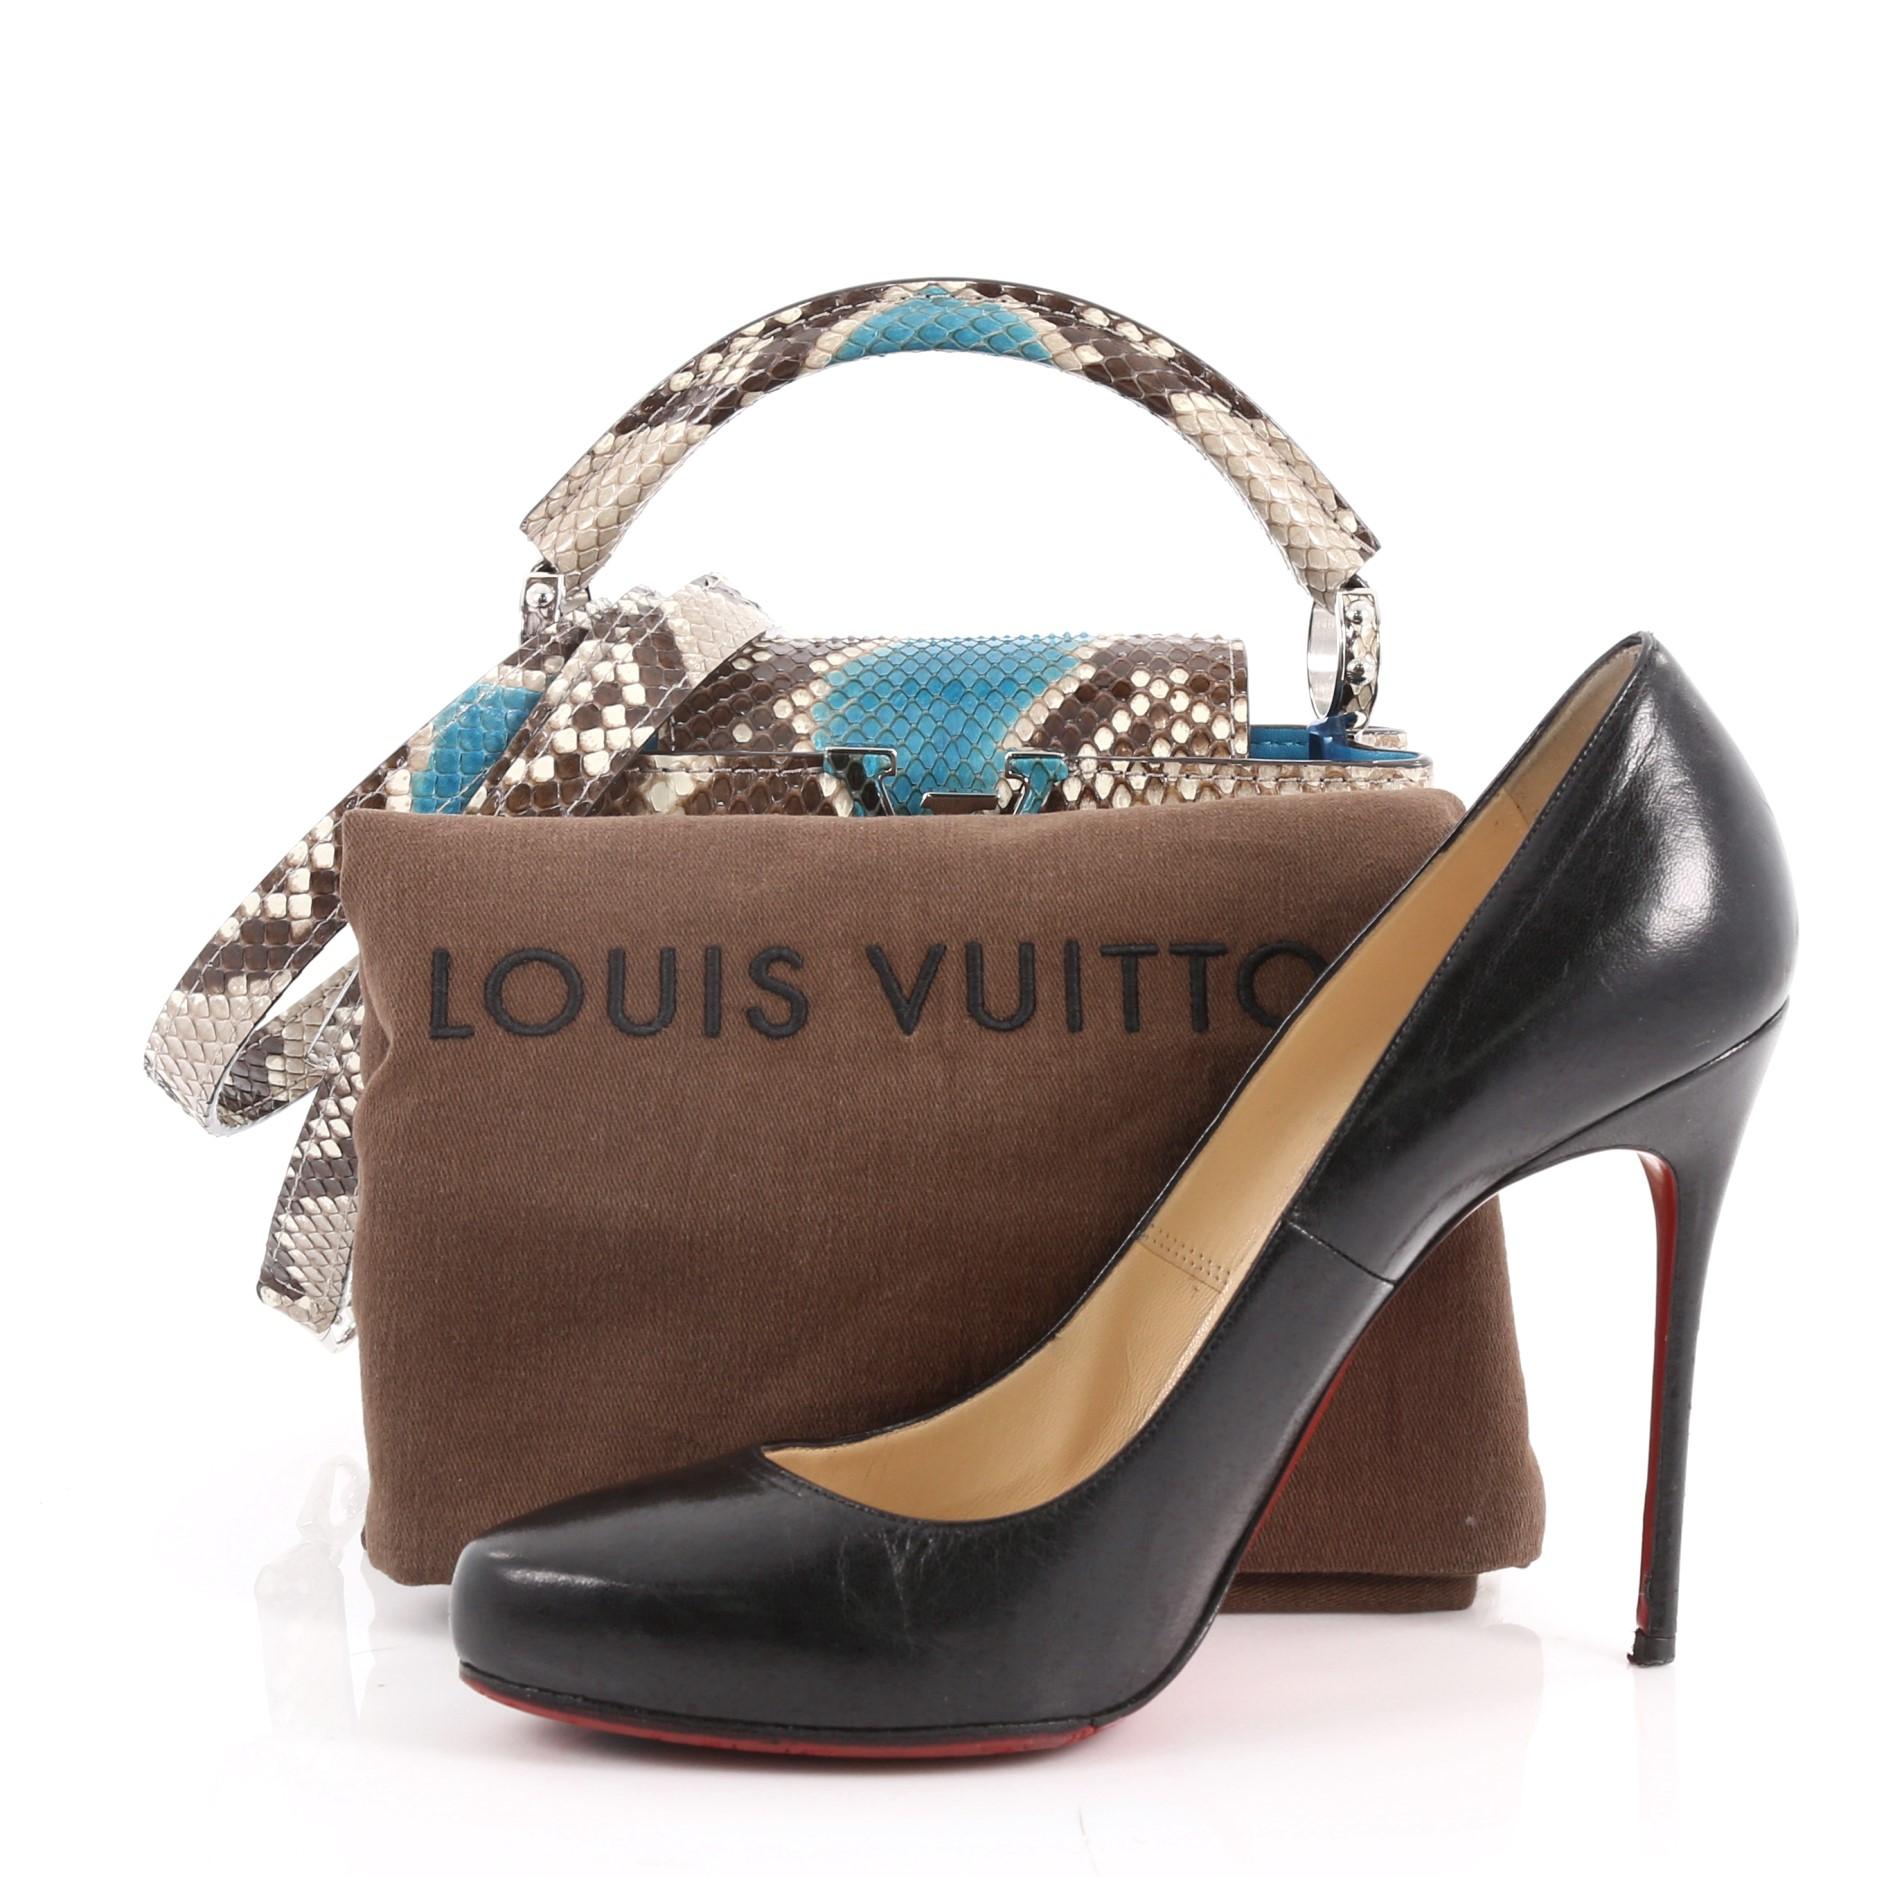 This authentic Louis Vuitton Capucines Handbag Python Mini is a sophisticated and ladylike luxurious bag inspired by the brand's Parisian heritage. Crafted in genuine brown and teal python skin, this chic, stand-out bag features a single loop